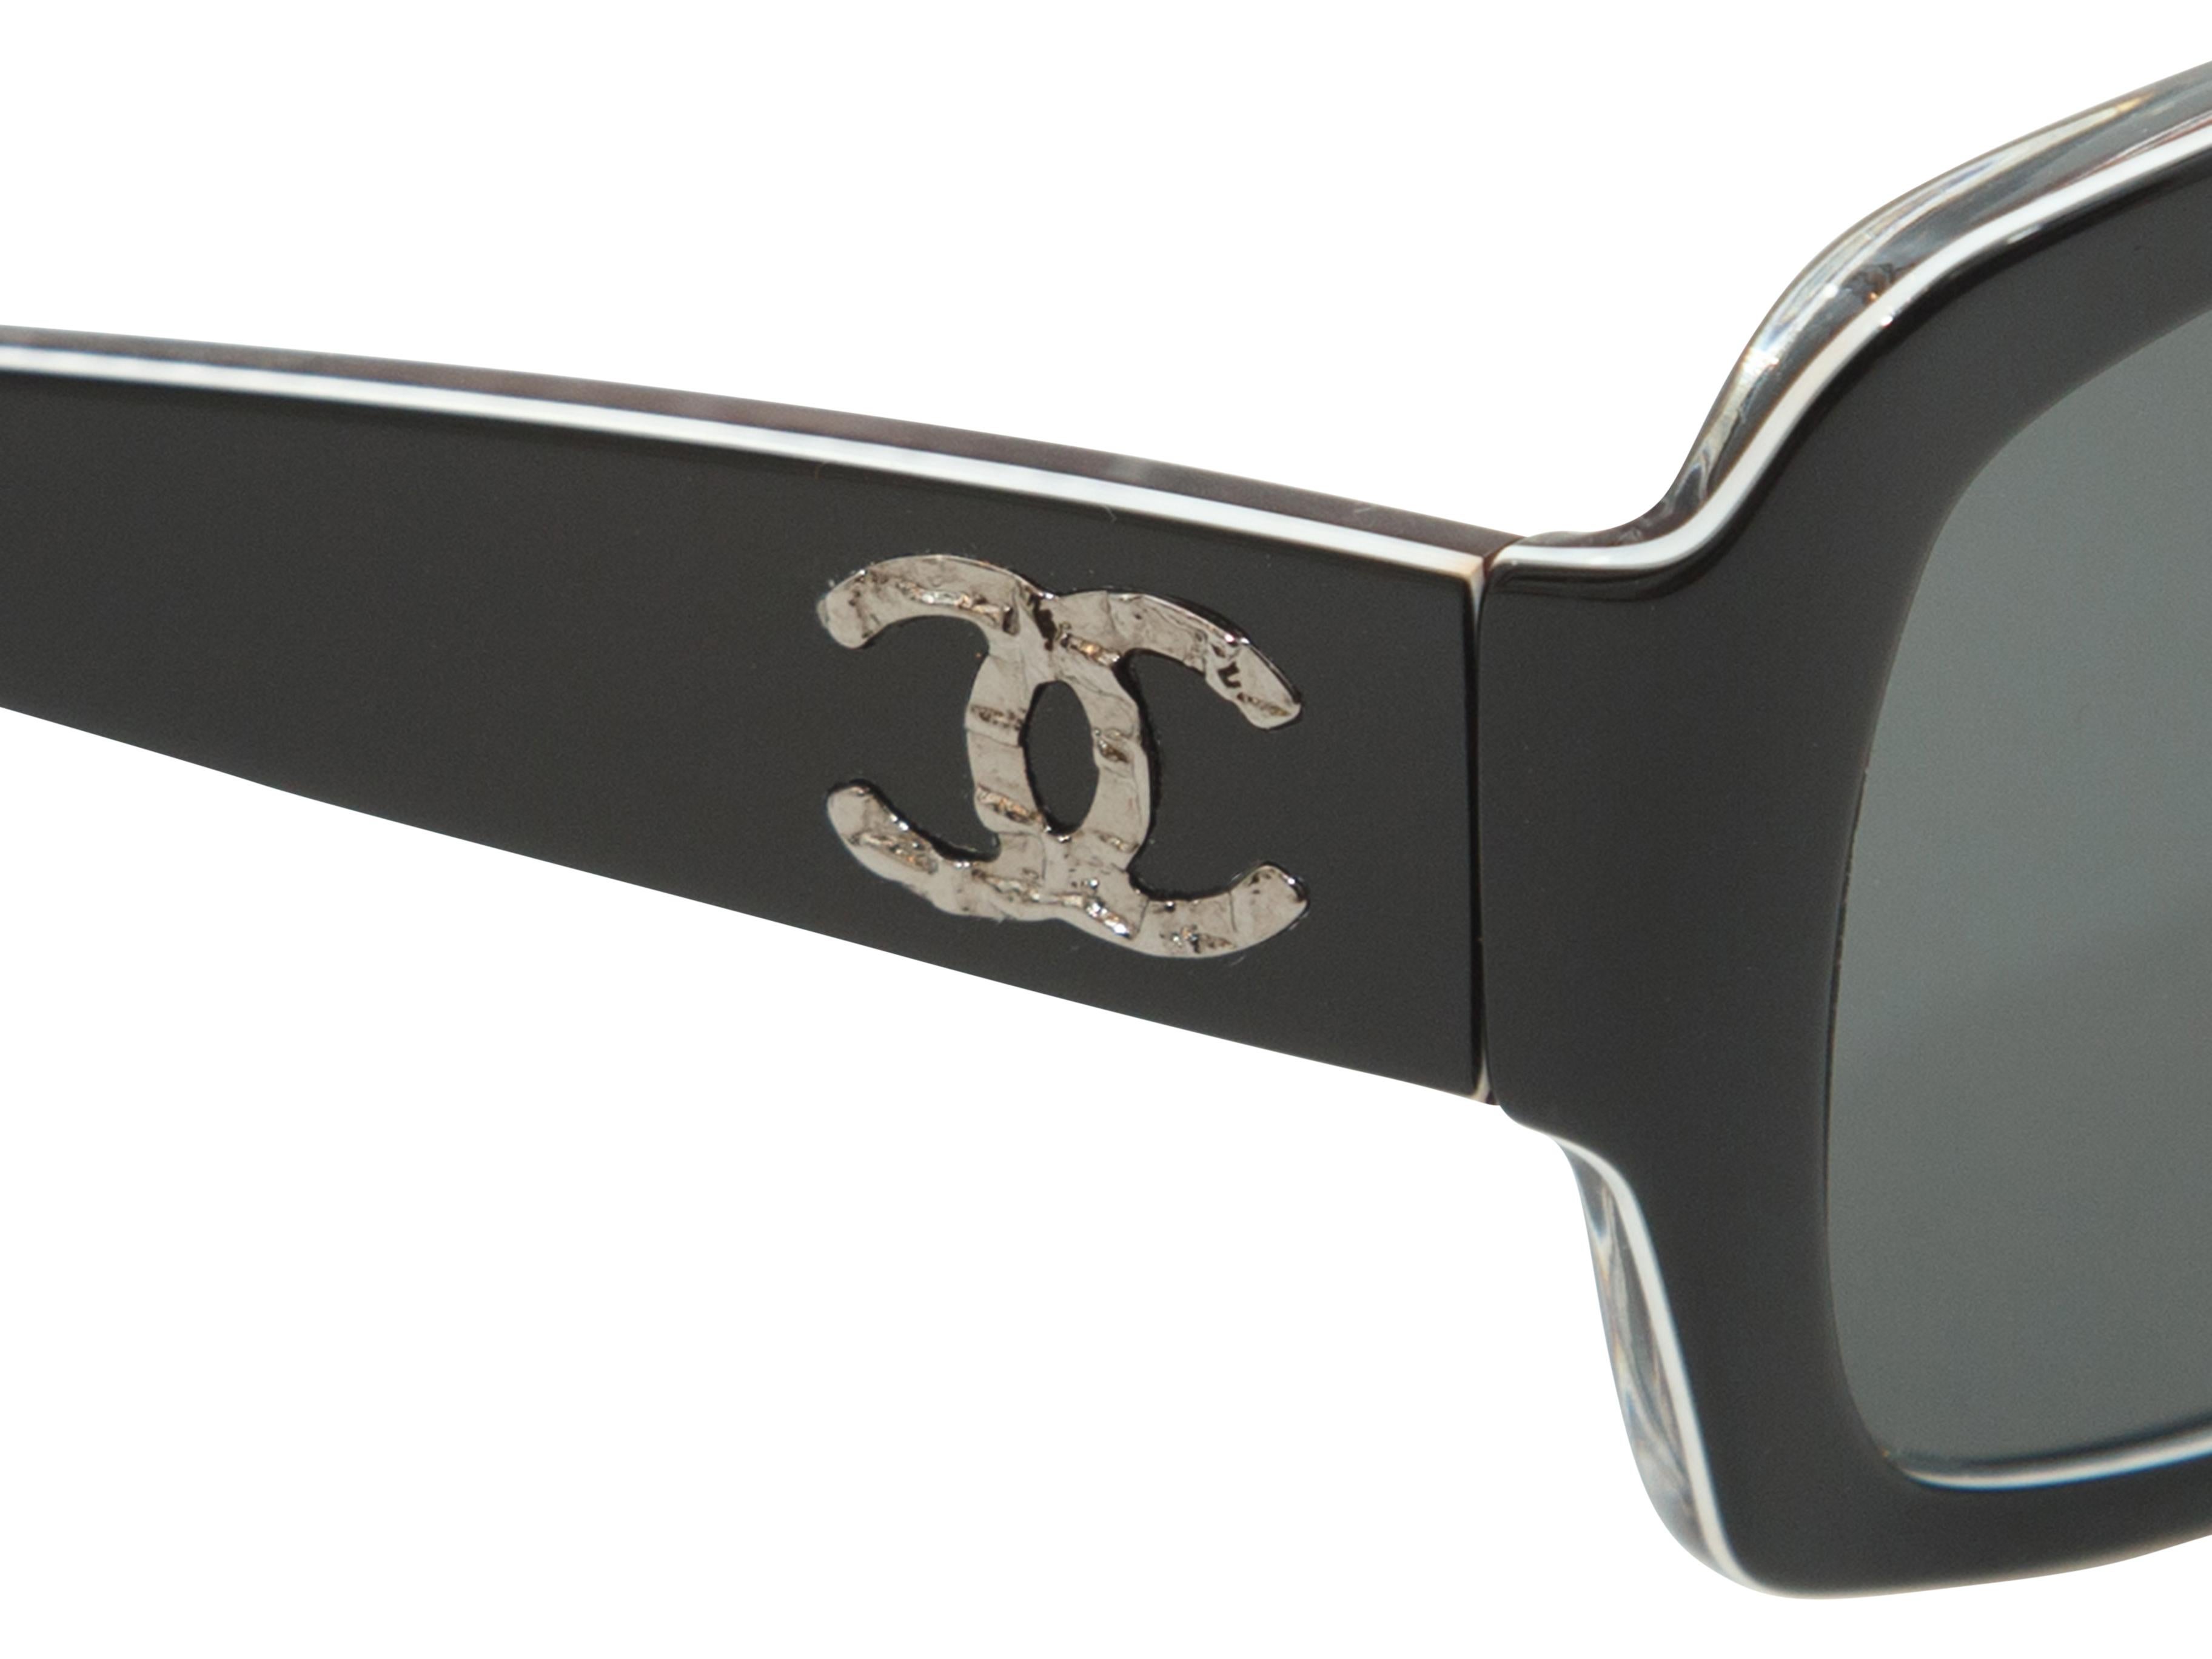 Product details: Black Large Chanel Sunglasses. The large-framed sunnies have black lenses, are trimmed in white, and have the crossed C — Chanel logo in silver on the temples. These sunnies come with their original case.   Measurements: 5